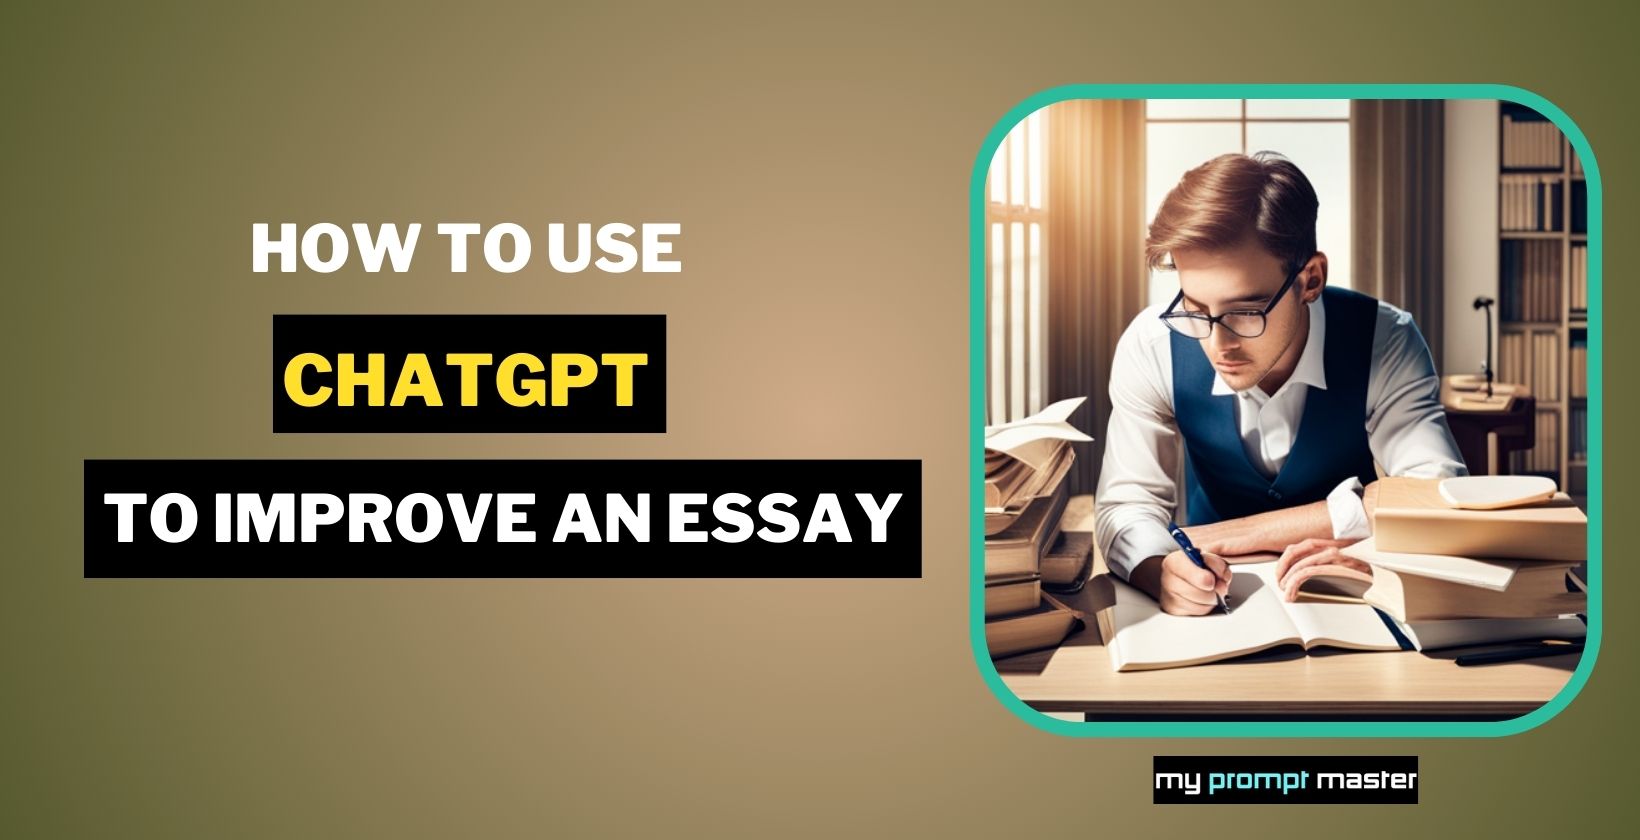 How To Use ChatGPT To Improve An Essay